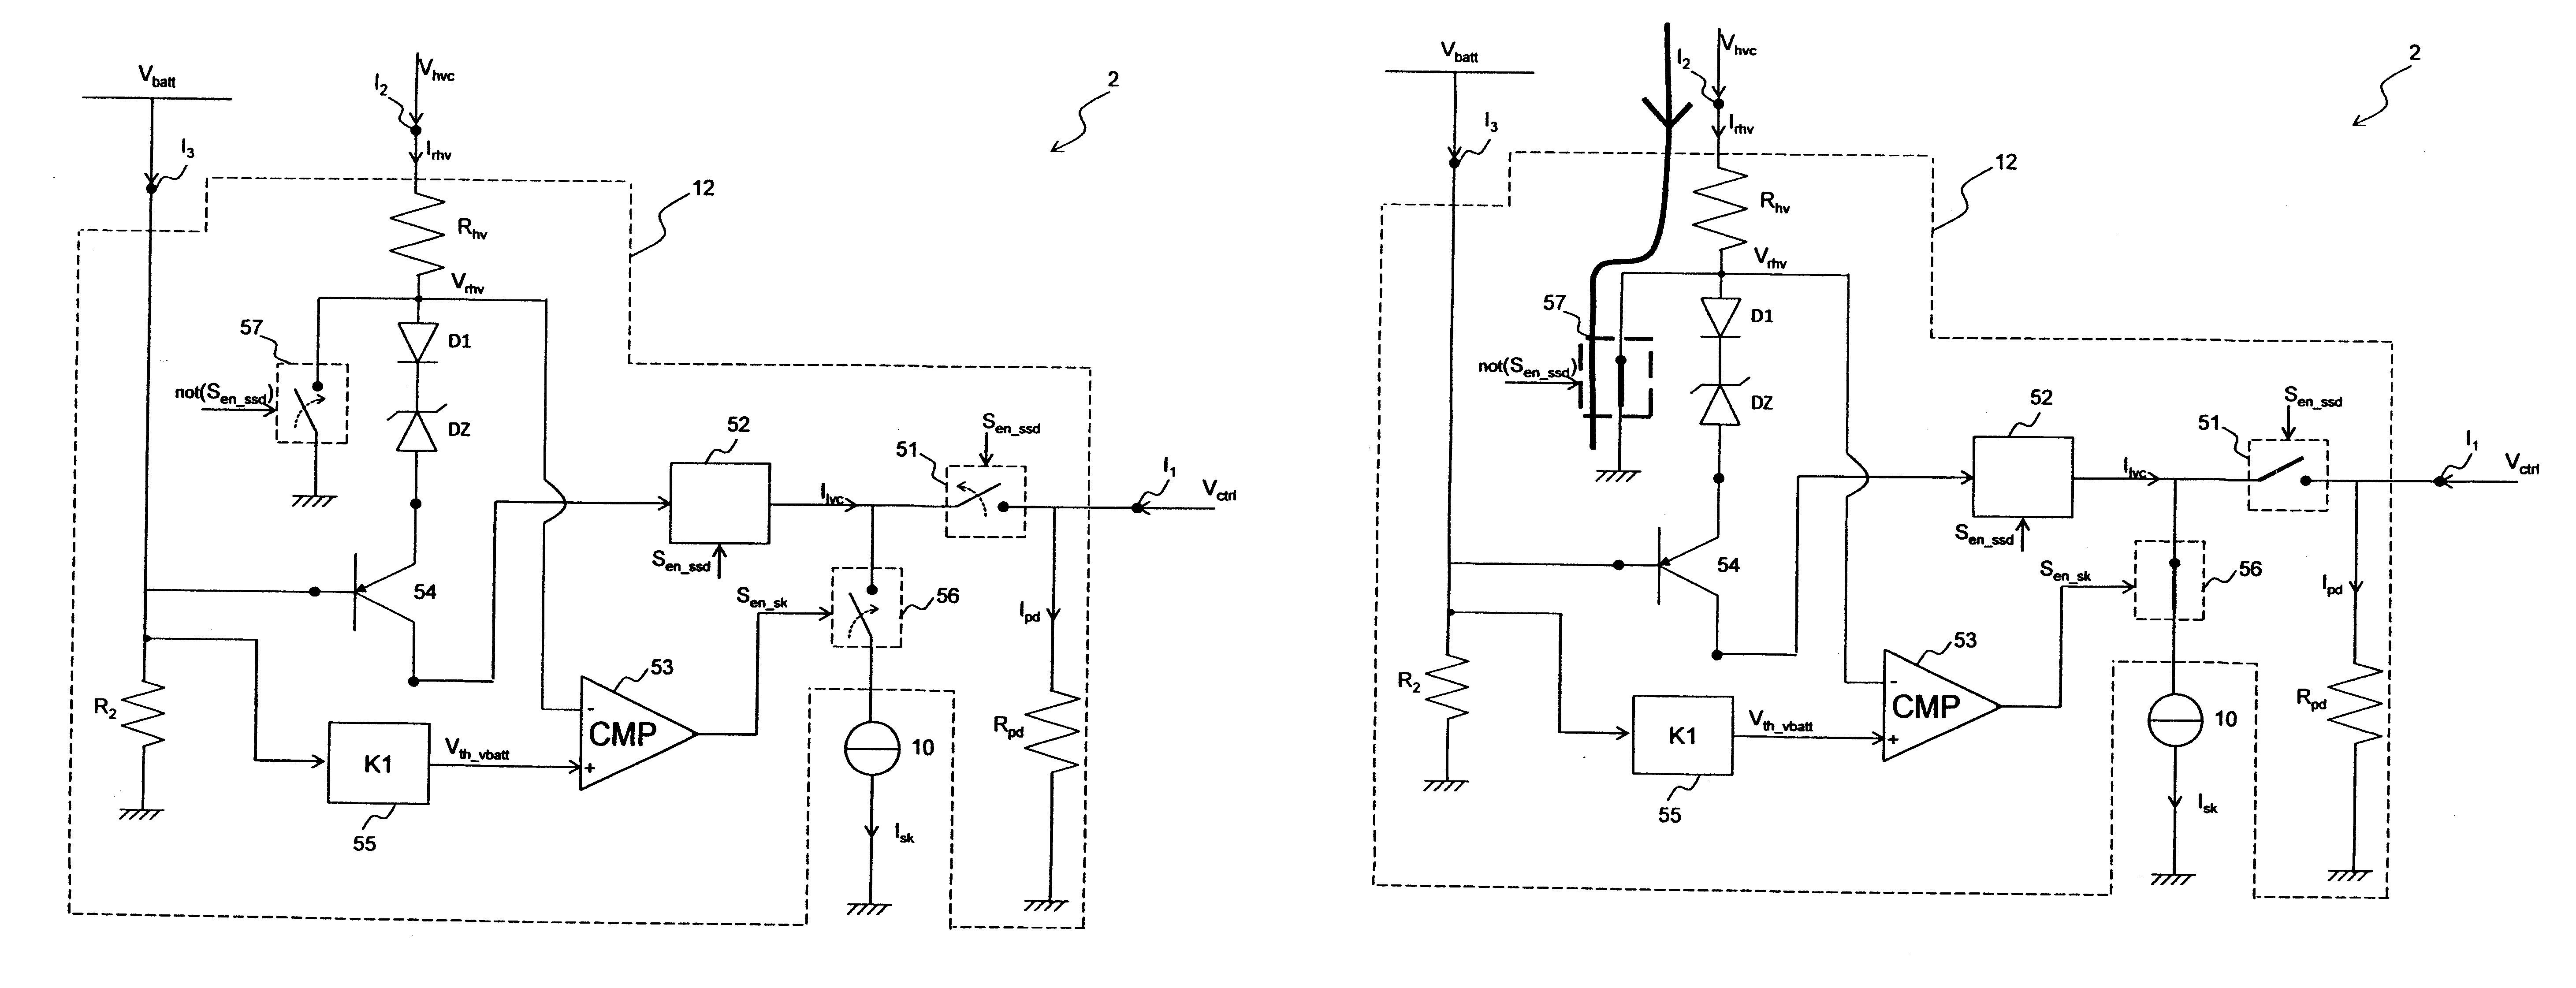 Electronic ignition system for an engine of a vehicle in case of failure